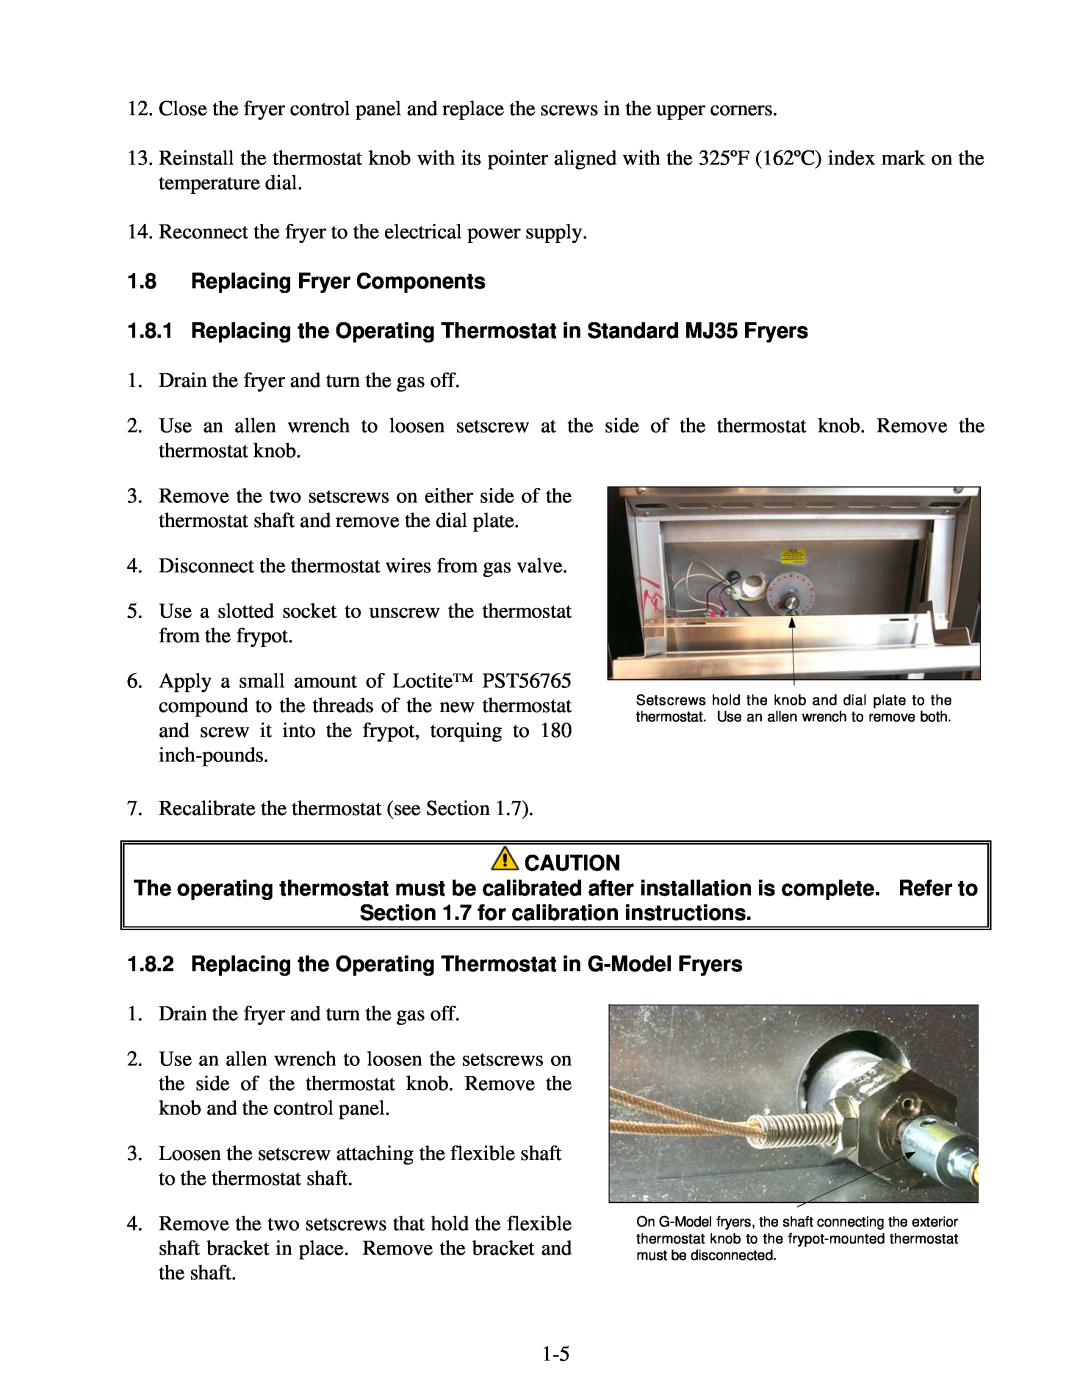 Frymaster 35 Series manual 1.8Replacing Fryer Components, 7 for calibration instructions 